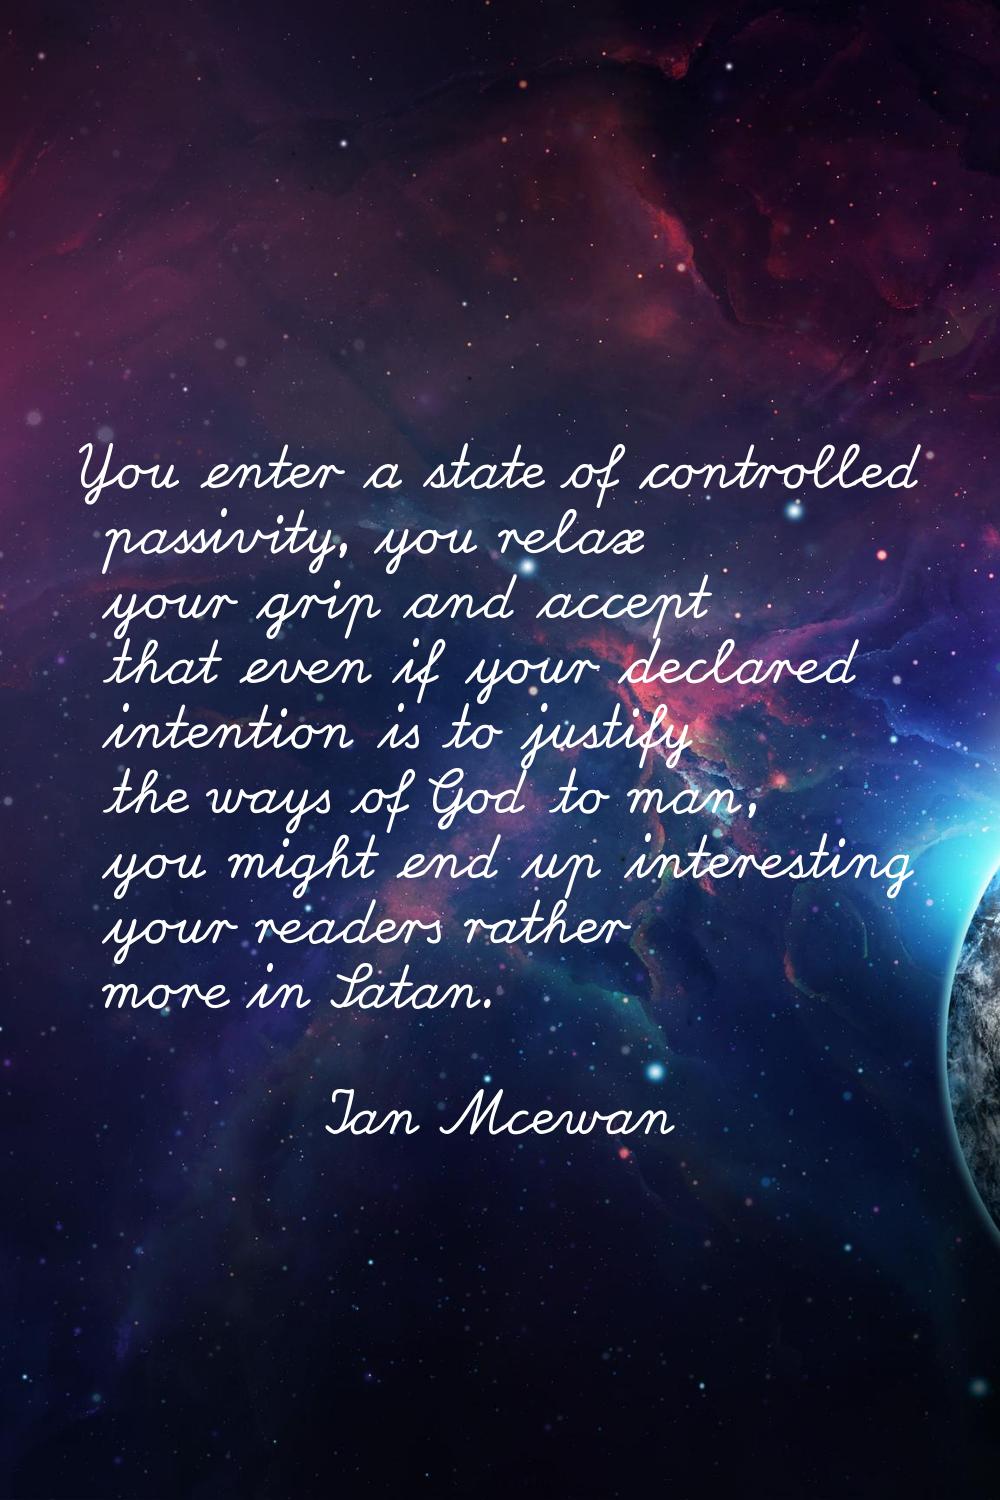 You enter a state of controlled passivity, you relax your grip and accept that even if your declare